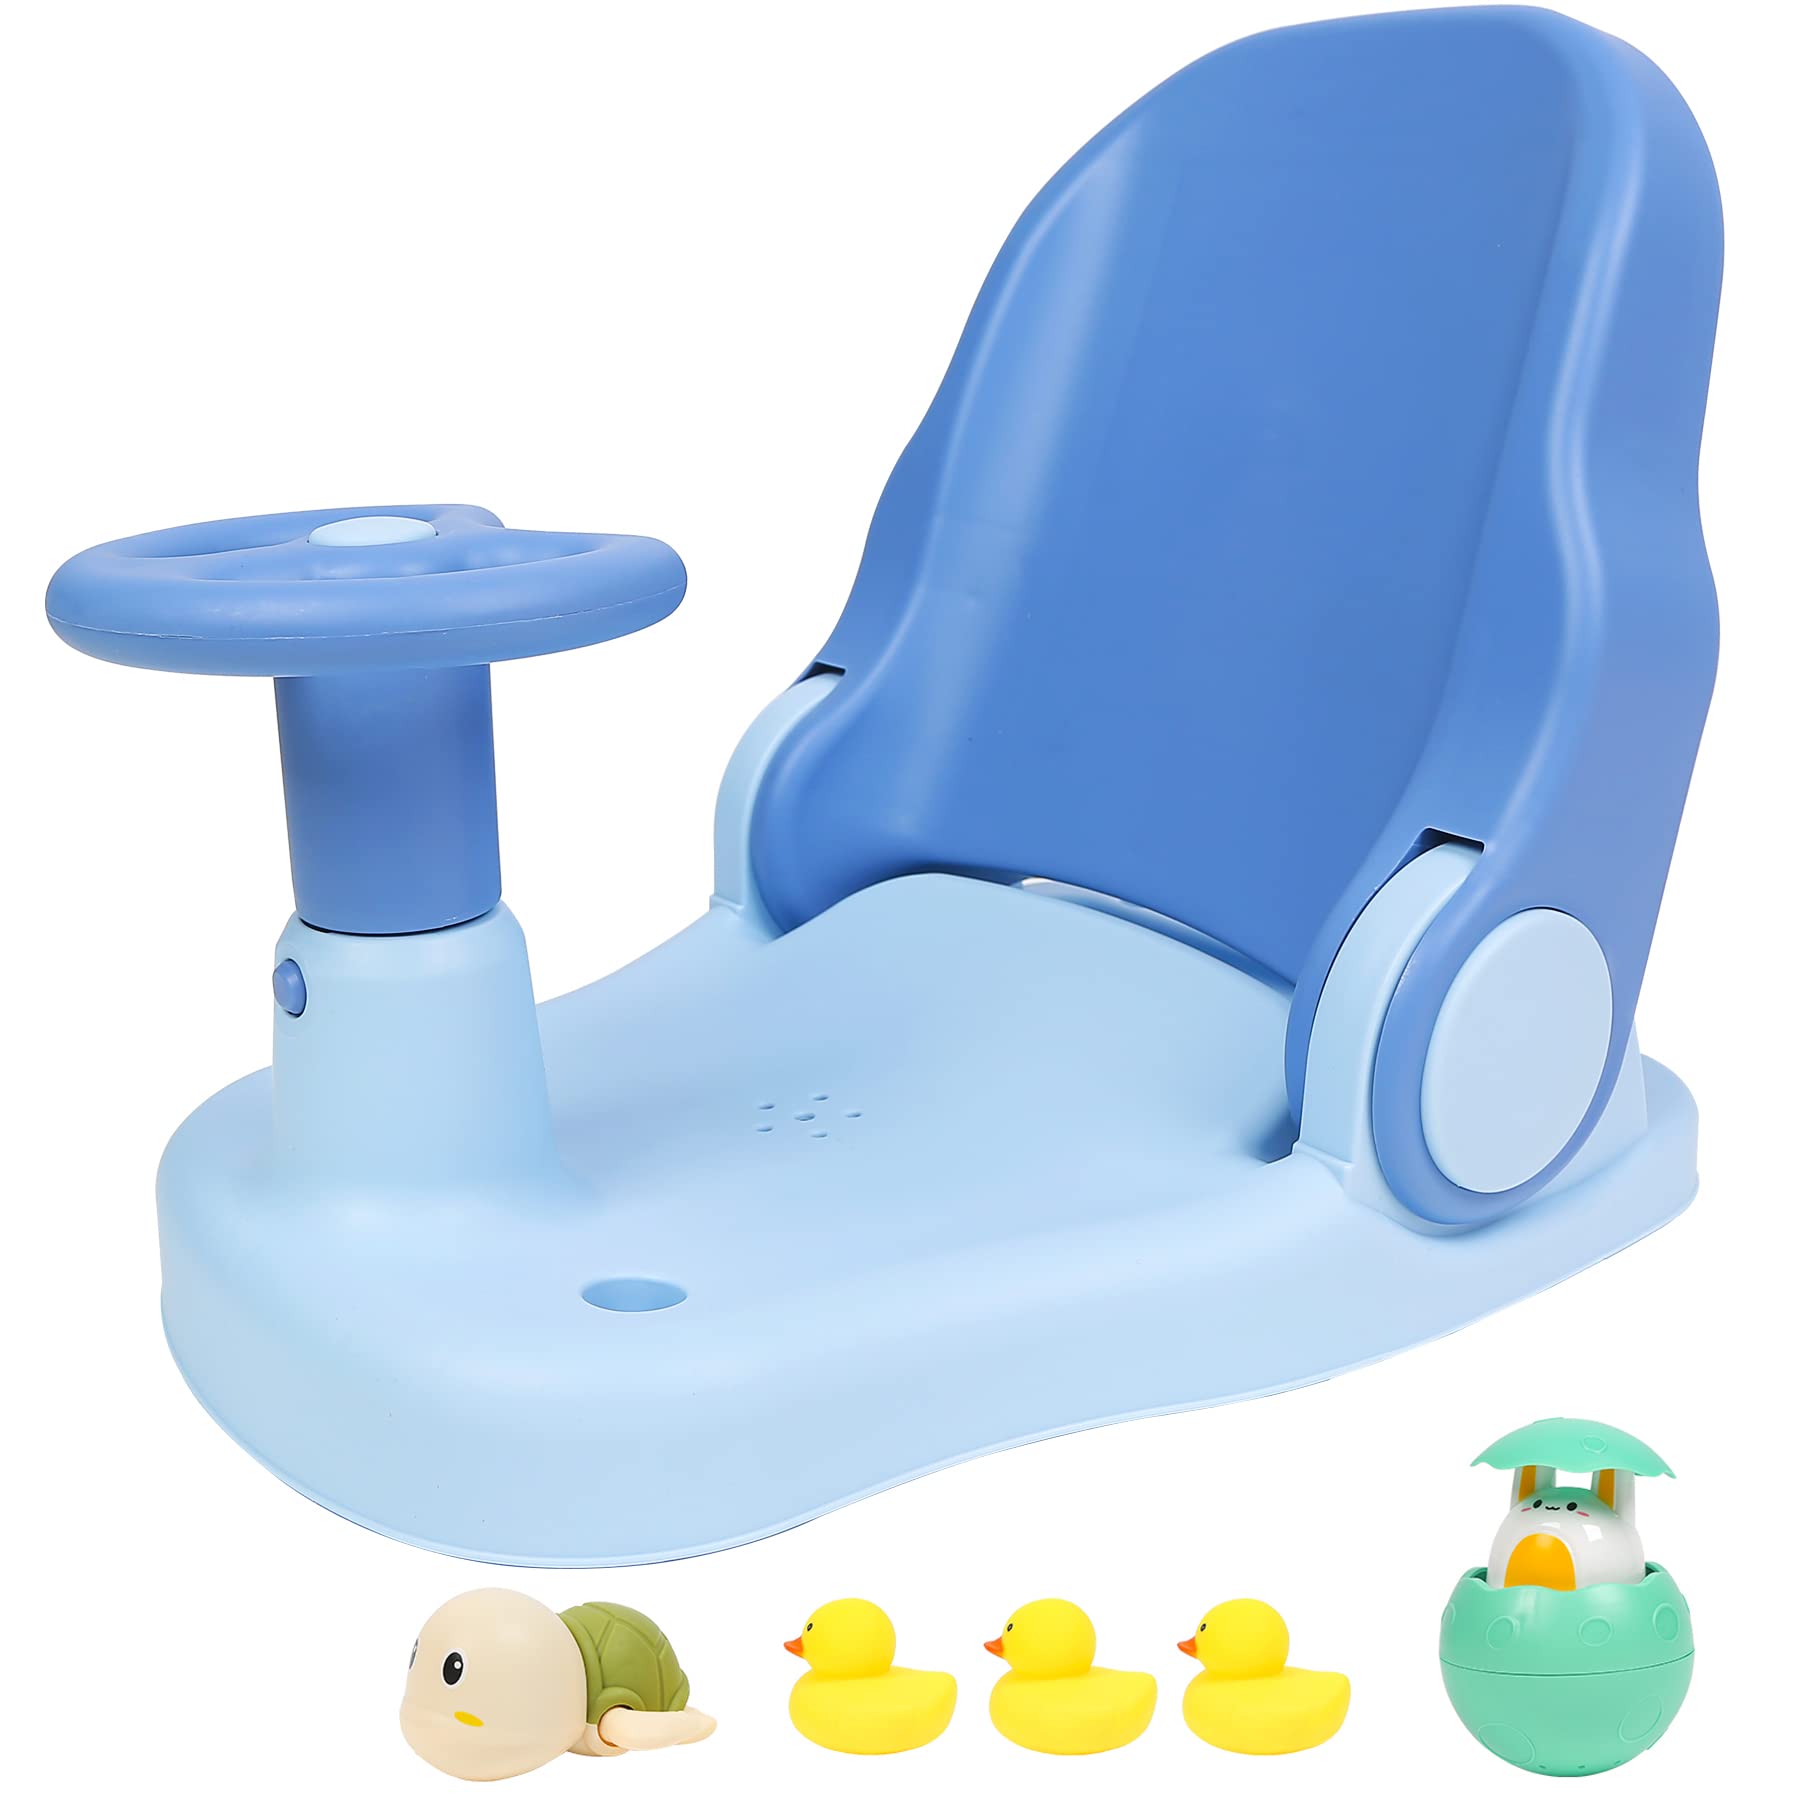 Morefeel Baby Bath Seat,Baby Bathtub Seat for Sit-up,Baby Shower Chair  Infant Bath Seat for Baby 6-36 Months with 4 Secure Suction Cups,Adjustable  Backrest Support (Blue)